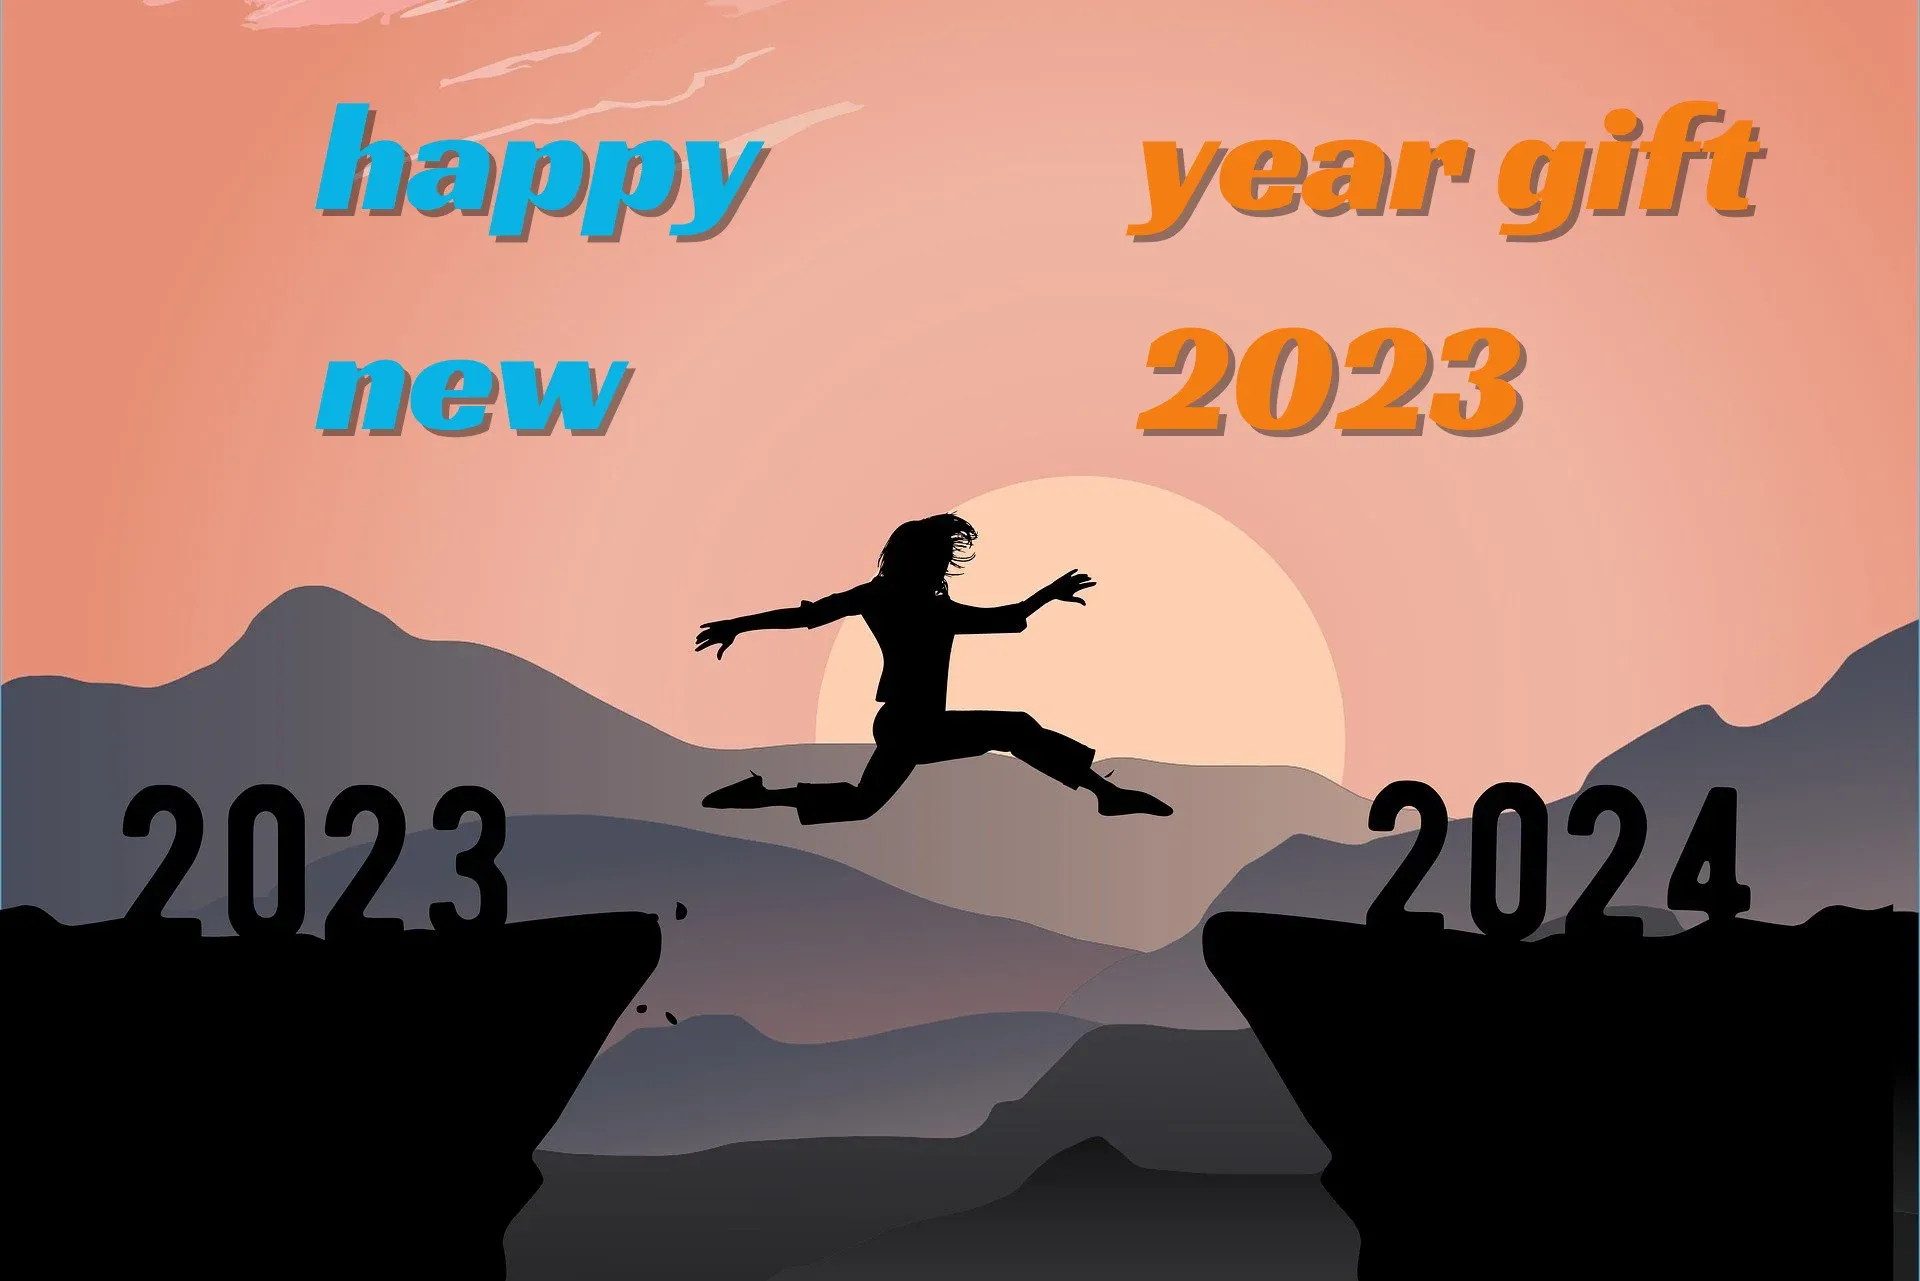 Happy New Year Gift 2023: Unwrapping Joy and Spreading Cheer by happy new year 2023 gift